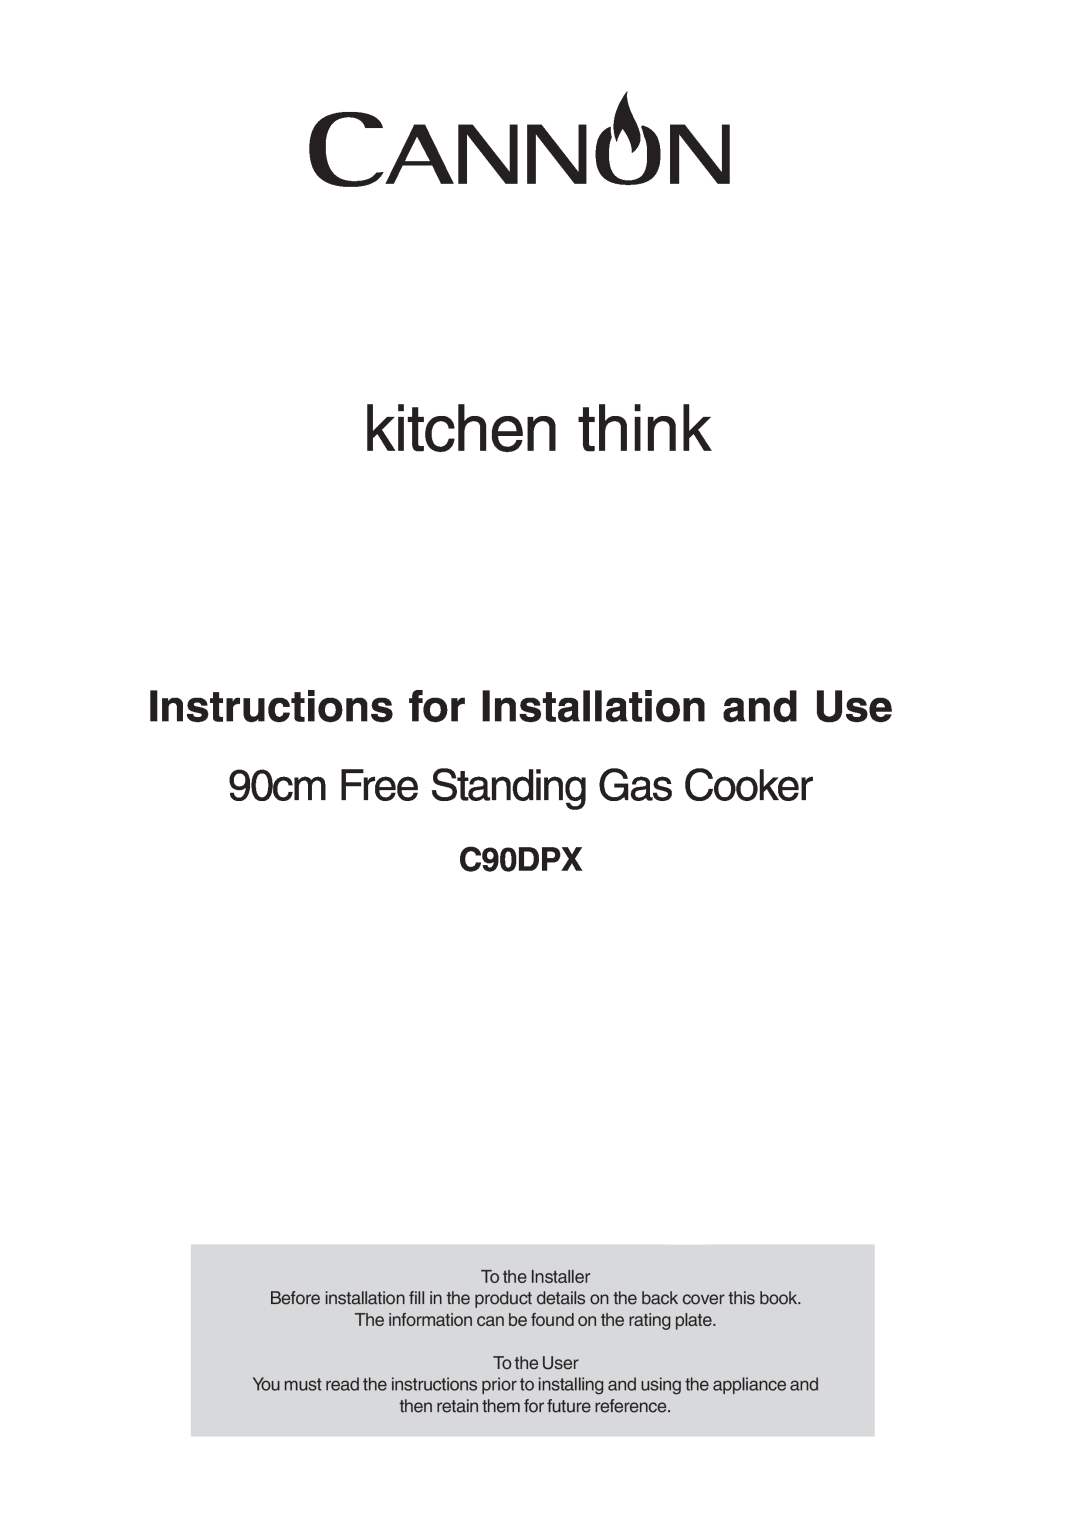 Cannon C90DPX manual kitchen think, Instructions for Installation and Use, 90cm Free Standing Gas Cooker 